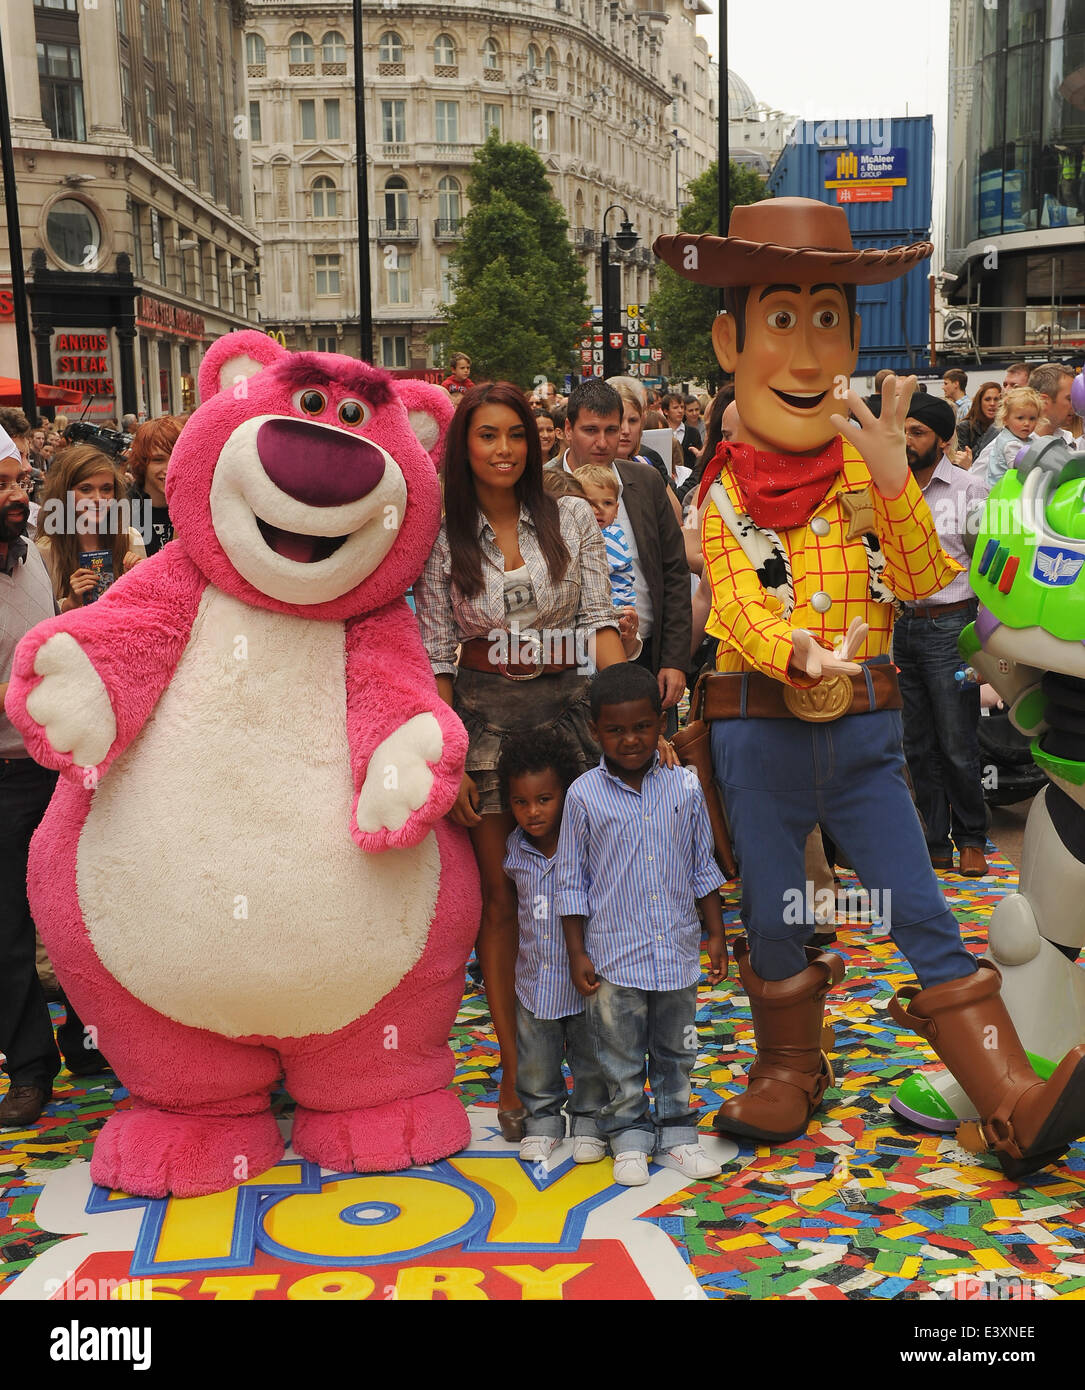 July 18, 2010 - London, England, United Kingdom - Chantelle Tagoe attends the UK premiere of 'Toy Story 3' at Empire Leicester Square. (Credit Image: © Ferdaus Shamim/ZUMA Wire/ZUMAPRESS.com) Stock Photo